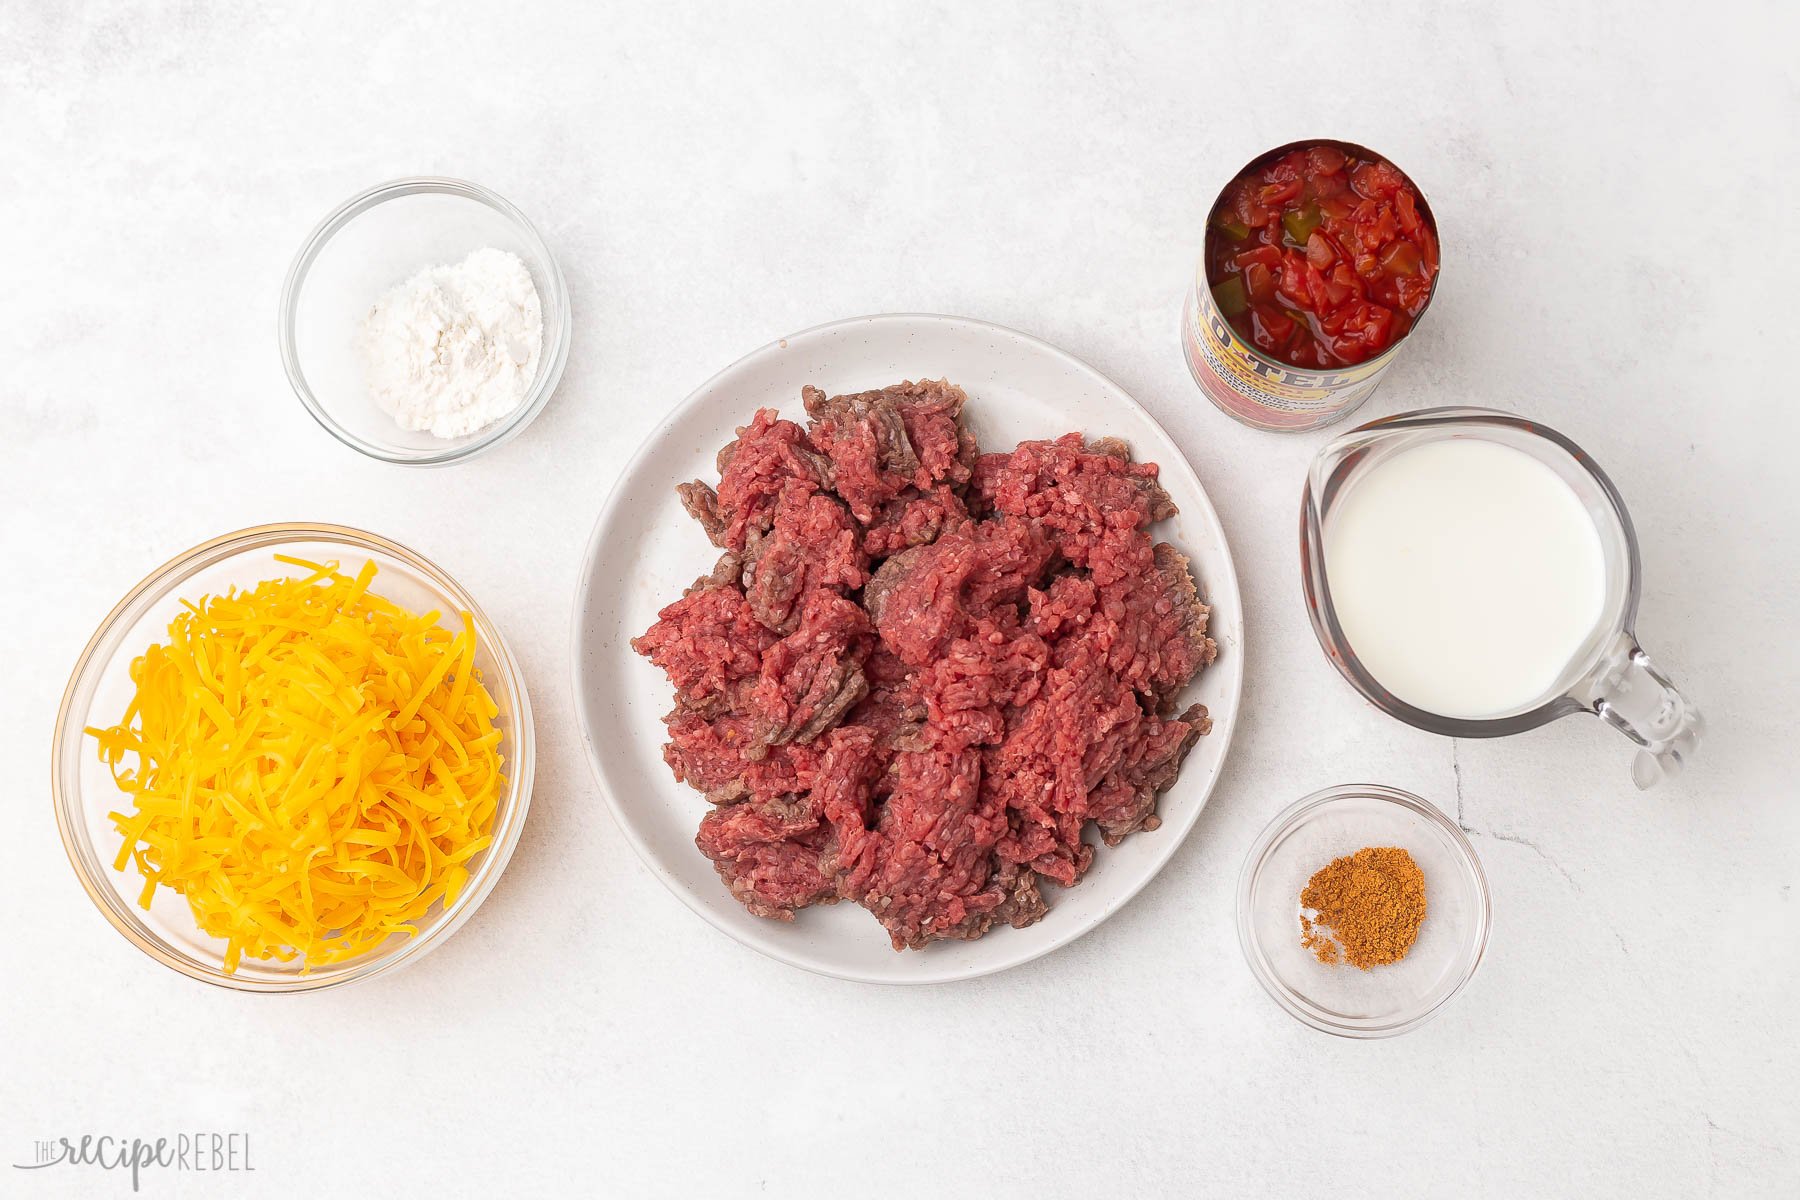 Top view of ingredients needed for Rotel dip.